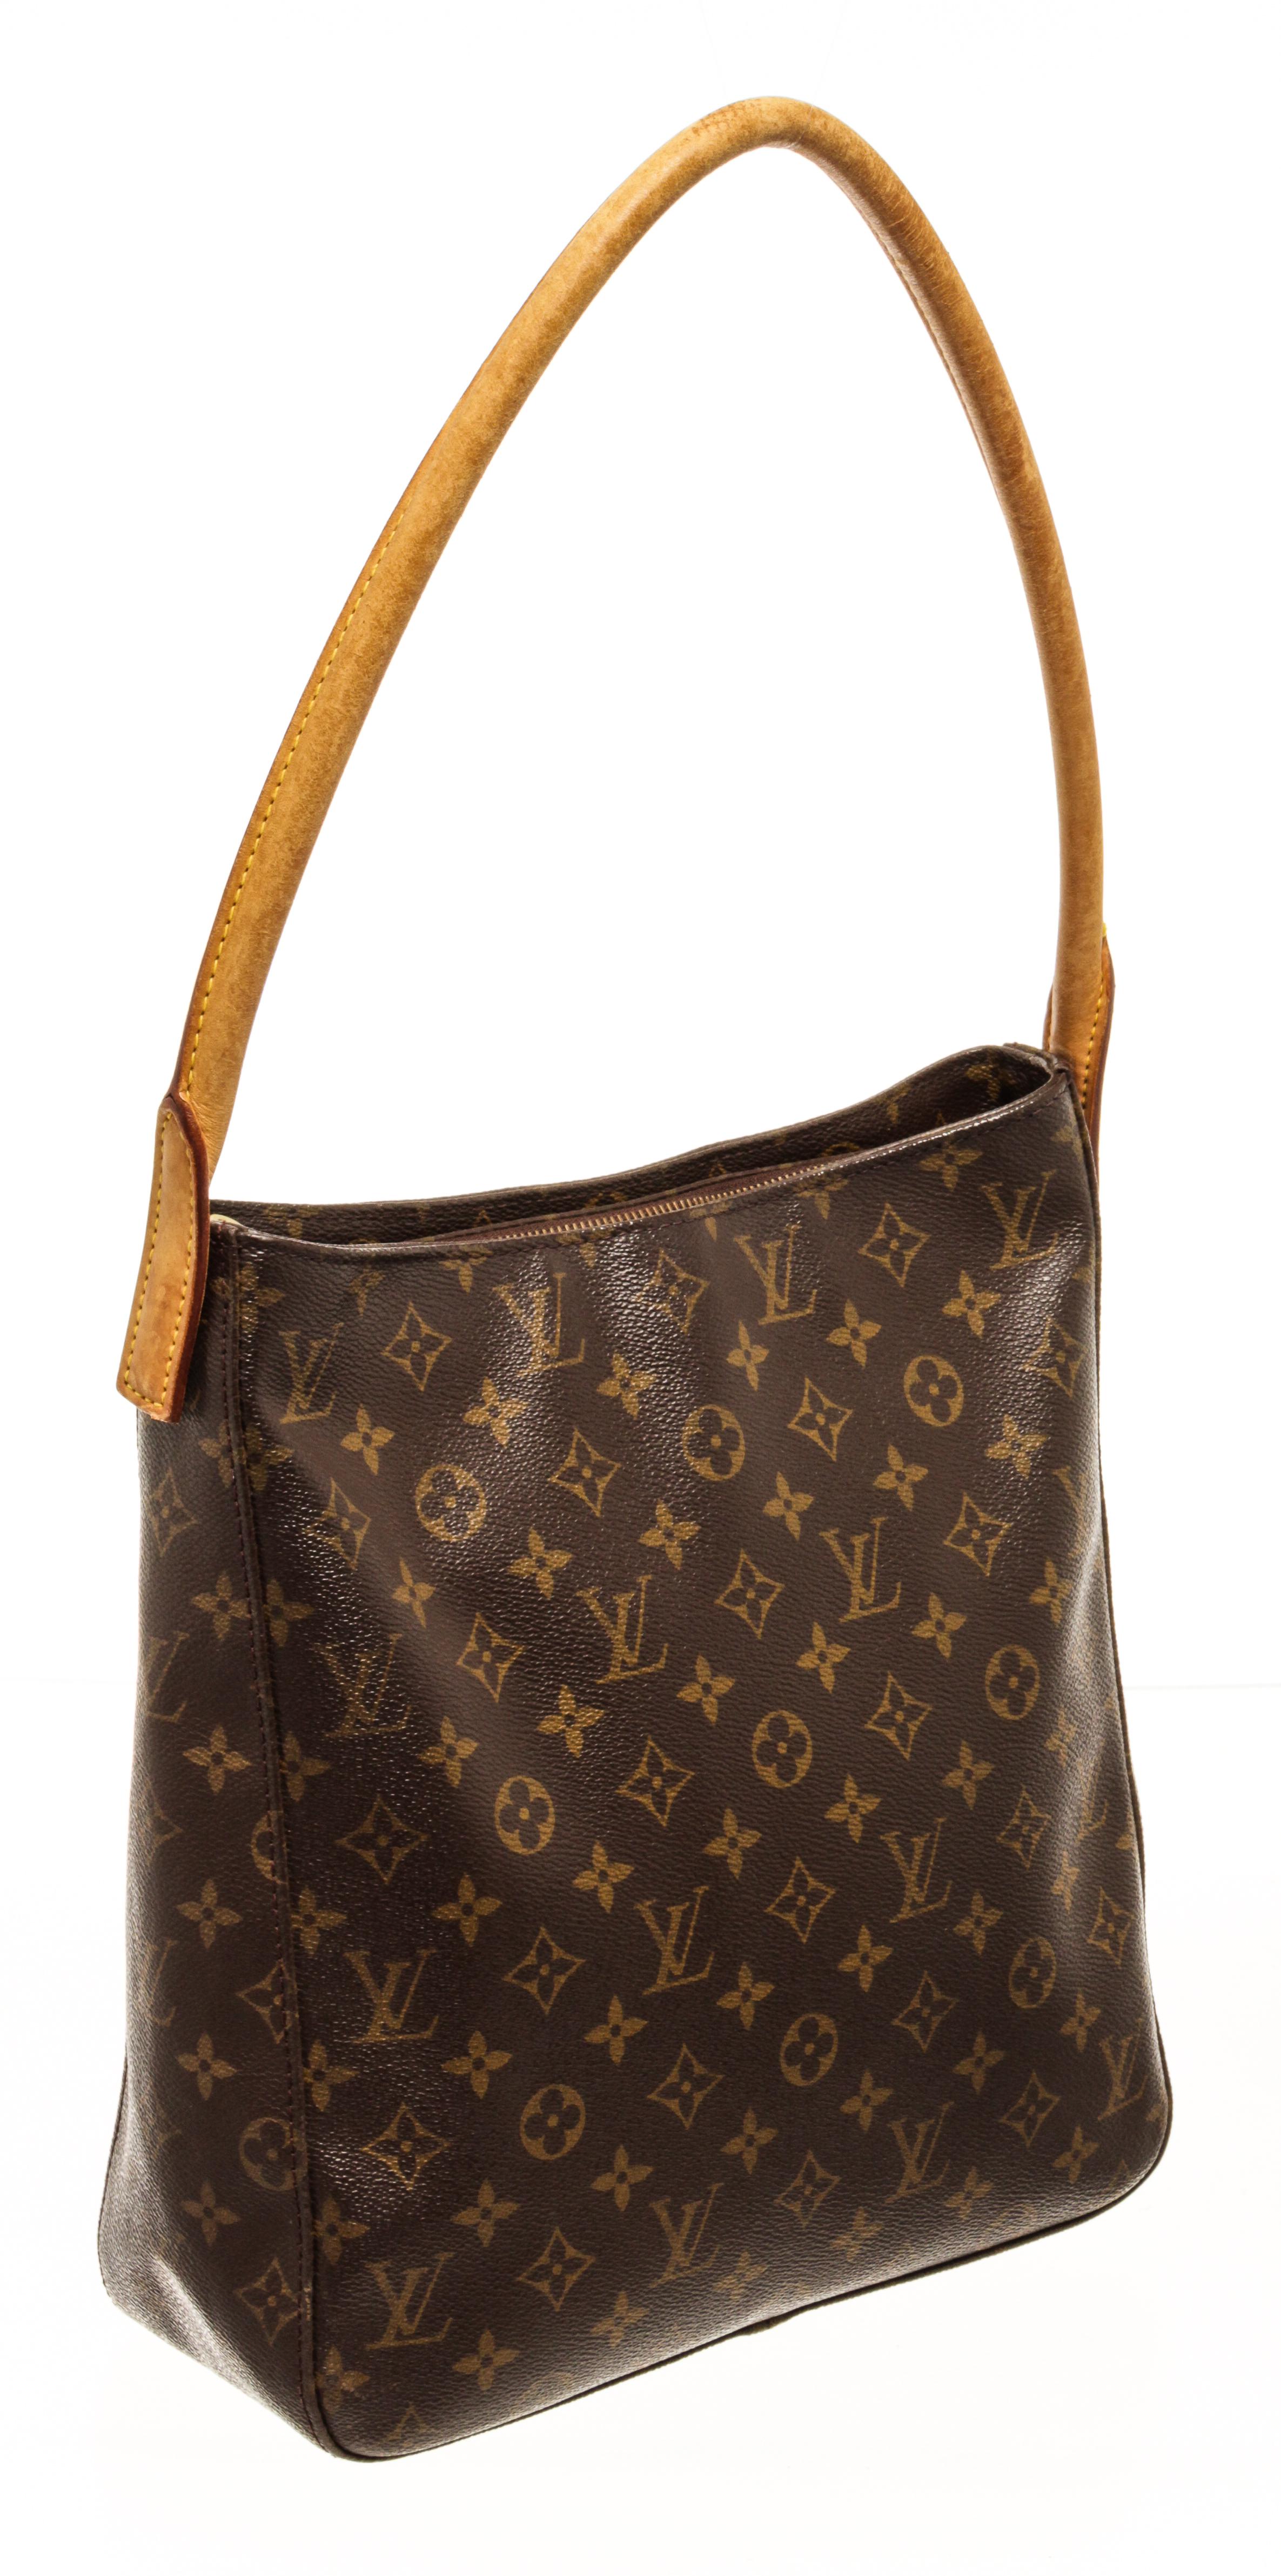 Louis Vuitton Monogram Looping GM handbag with brown coated canvas exterior, beige suede lining, contrasting vachetta leather top handle, gold-tone hardware, zipper closure, and one main compartment with one zip pocket.

81966MSC